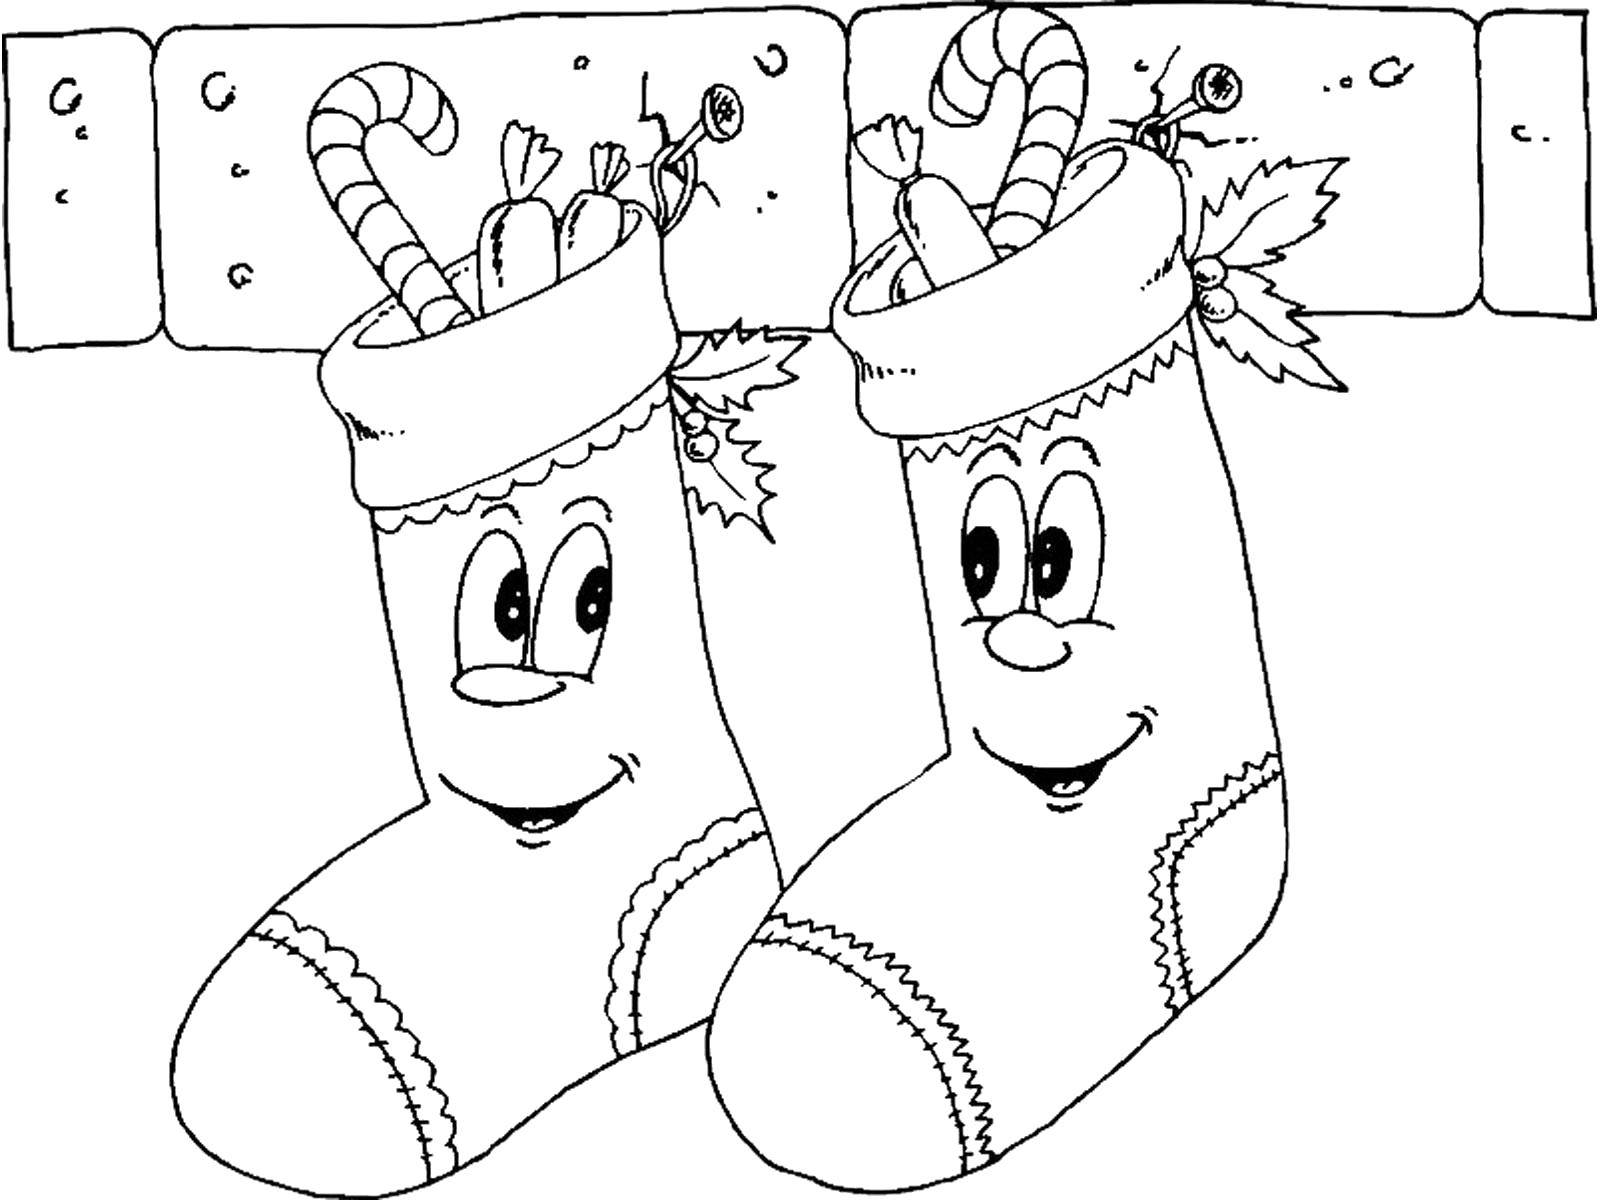 Coloring Stockings. Category Christmas. Tags:  Christmas, gifts.